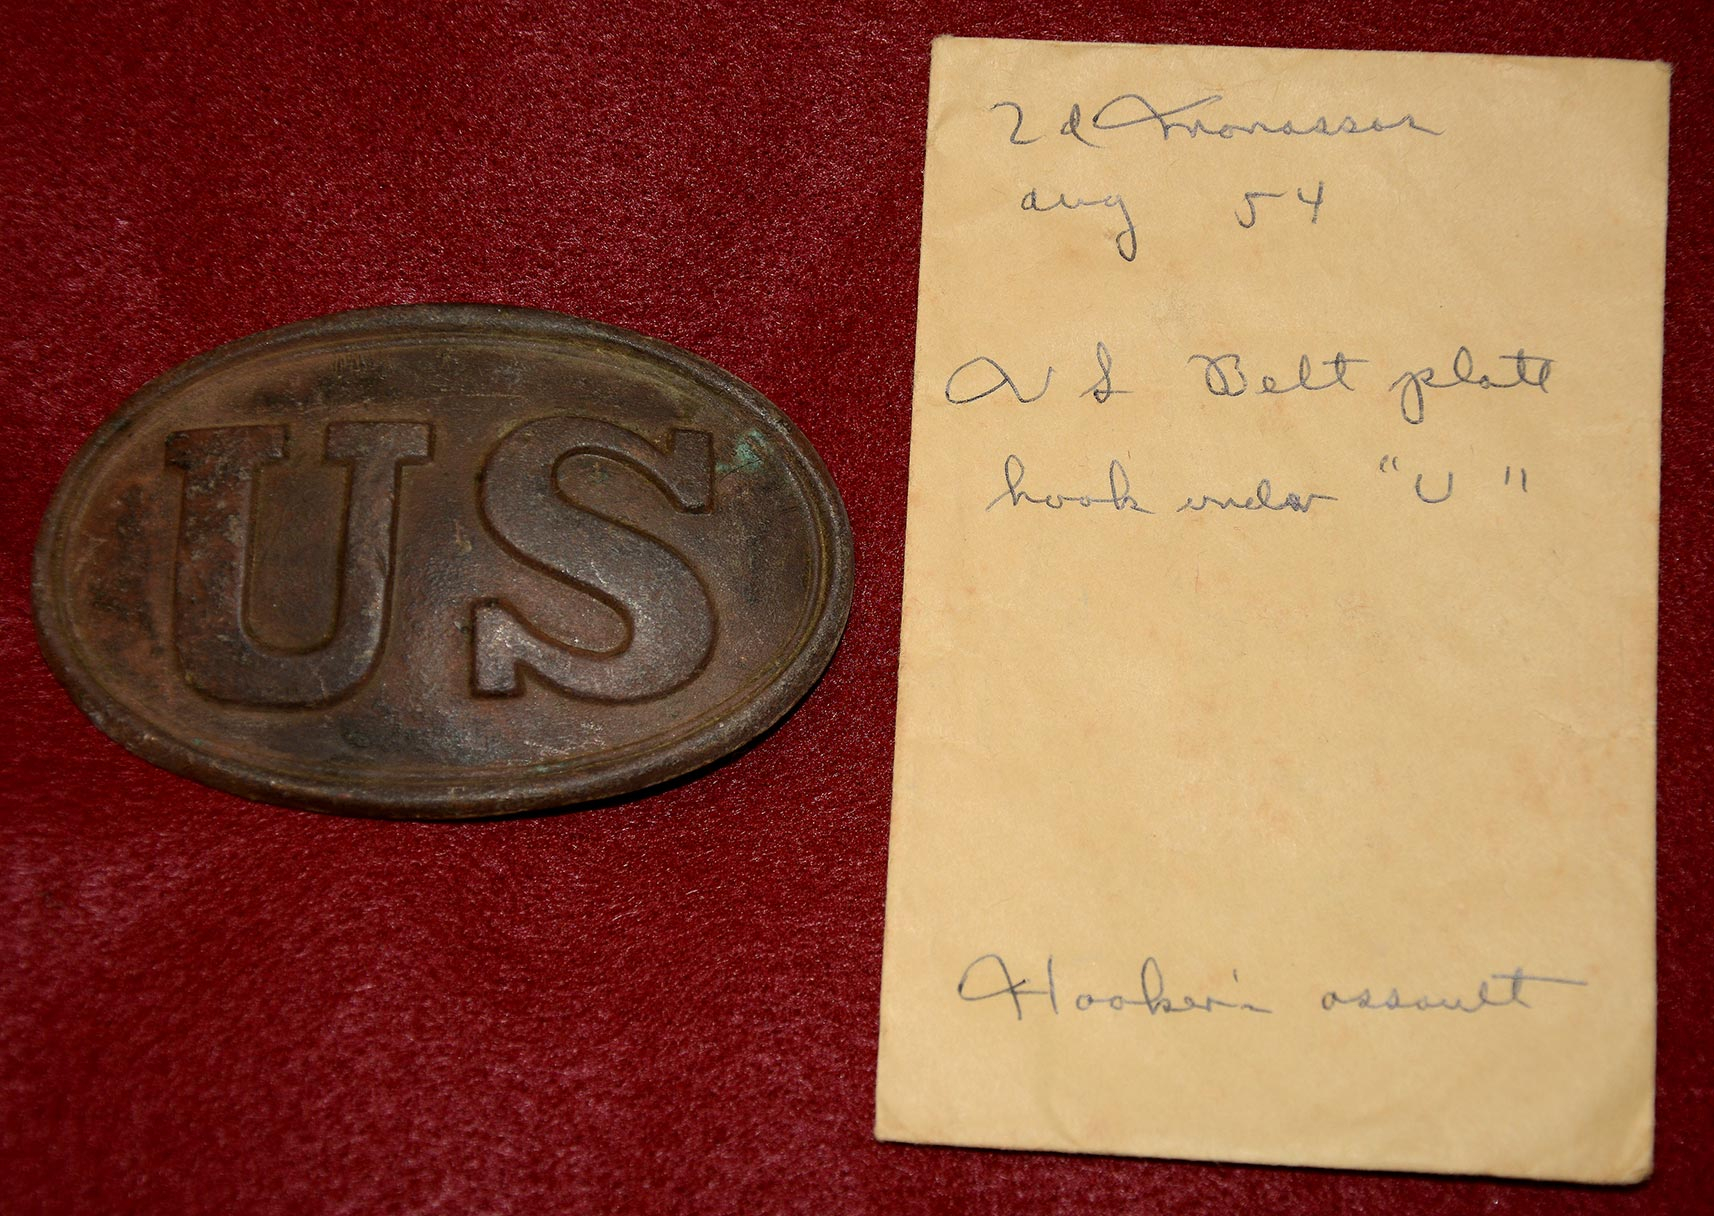 US PATTERN 1839 OVAL BELT PLATE EXCAVATED AT 2ND MANASSAS BY SYD KERKSIS IN 1954